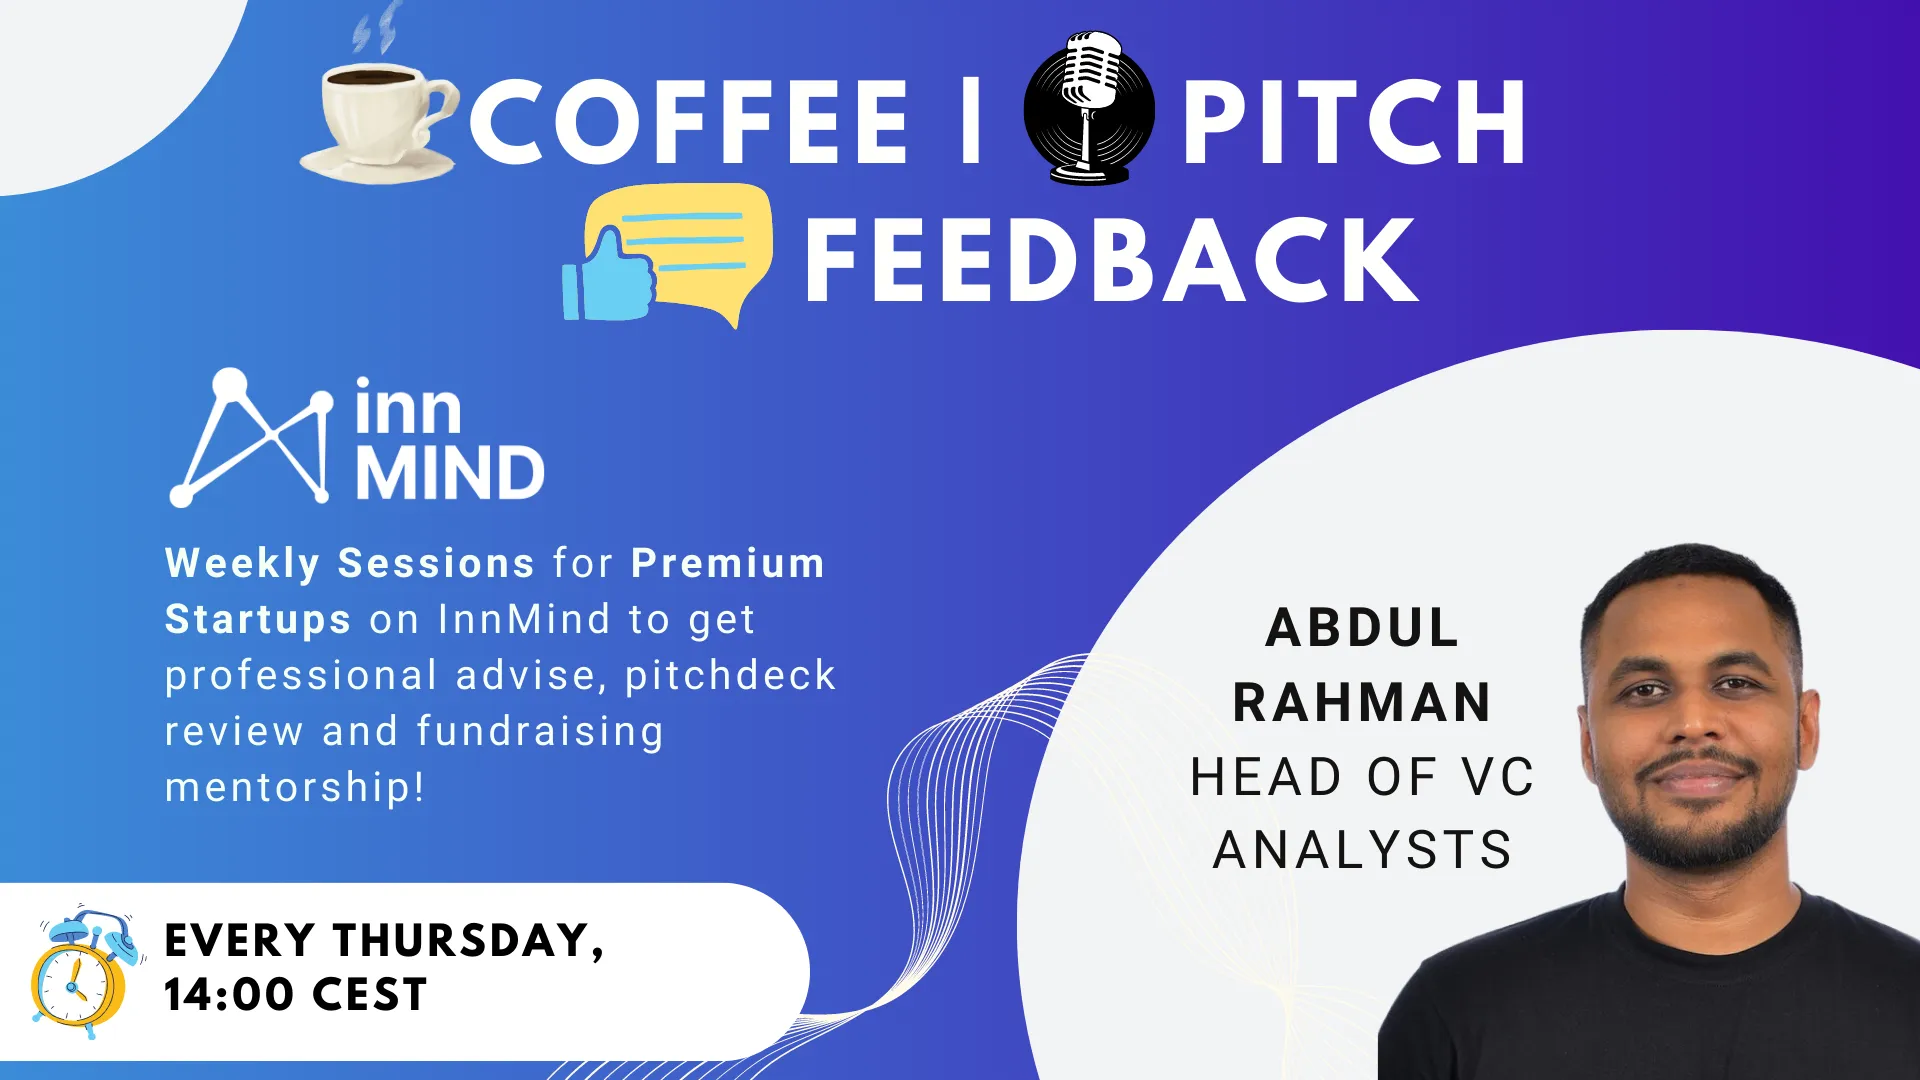 Pitch deck is the secret weapon that opens the door to venture capital investment! And now you can perfect your presentation with guidance from our leading expert, Abdul Rahman, Head of InnMind #VC Analysts and #Startup Mentor.

Join our unique Weekly Pitch Revision & Feedback Session, present your pitch deck and get insider tips on how to improve your presentation and fundraising #strategy. This is an invaluable chance to prepare to present in front of real venture capital funds.

You will receive personalized feedback on the following:
💥 The content and style of your pitch
💥 Ways to strengthen your presentation
💥 Q&A from a venture capitalist's perspective

When: August 3 at 14:00 CEST
Who: for startup founders with a premium subscription to InnMind
Format: 6 startups per session

Book your spot today: https://app.innmind.com/events/invite/2023/7/10/75KqTik6H68dsxfxn